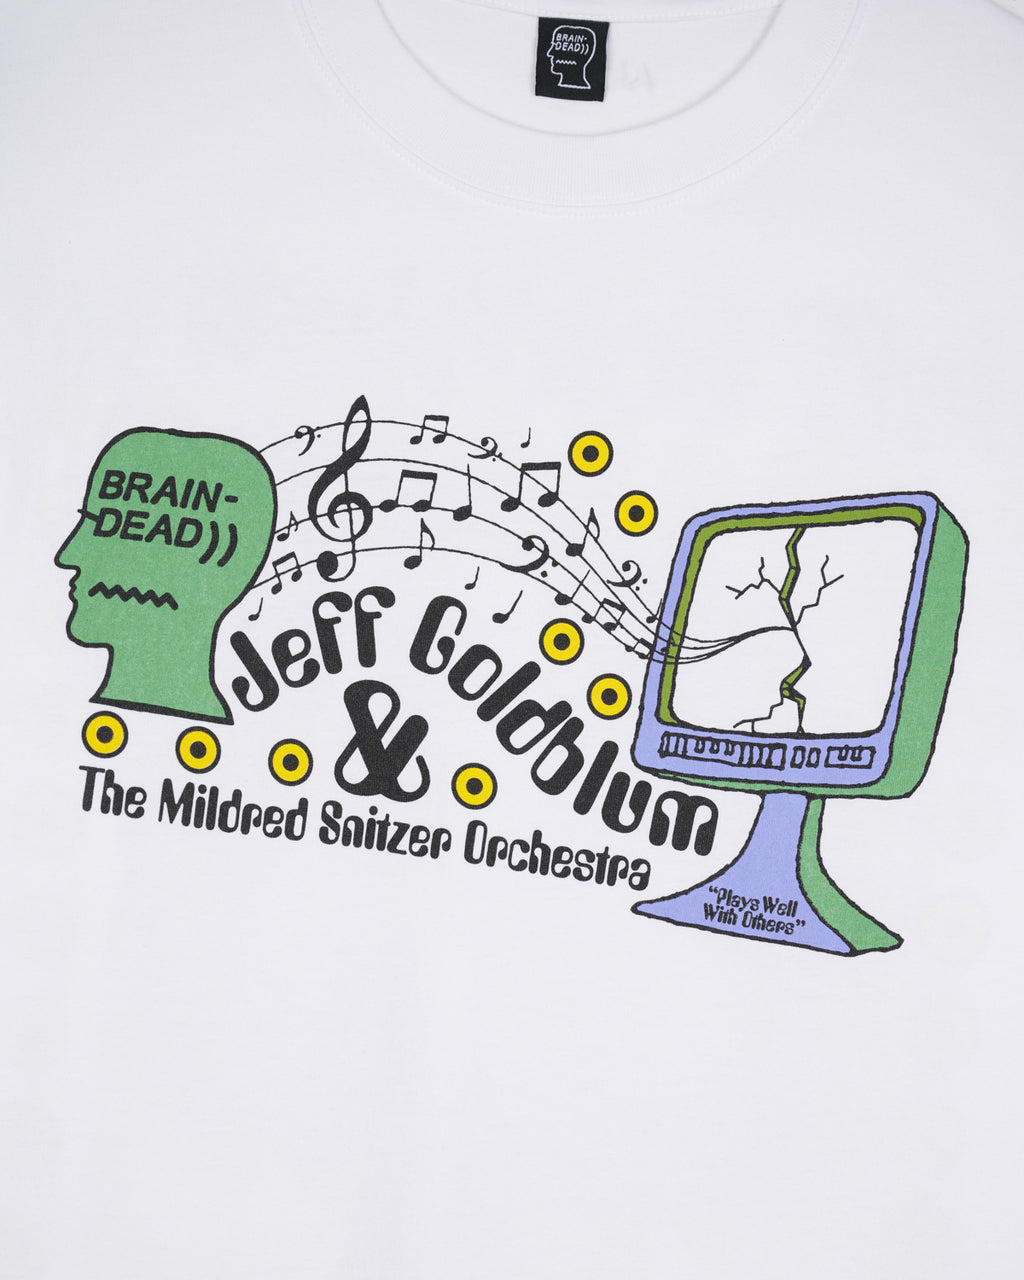 Brain Dead x Jeff Goldblum & The Mildred Snitzer Orchestra "Plays Well With Others" T-shirt - White 3